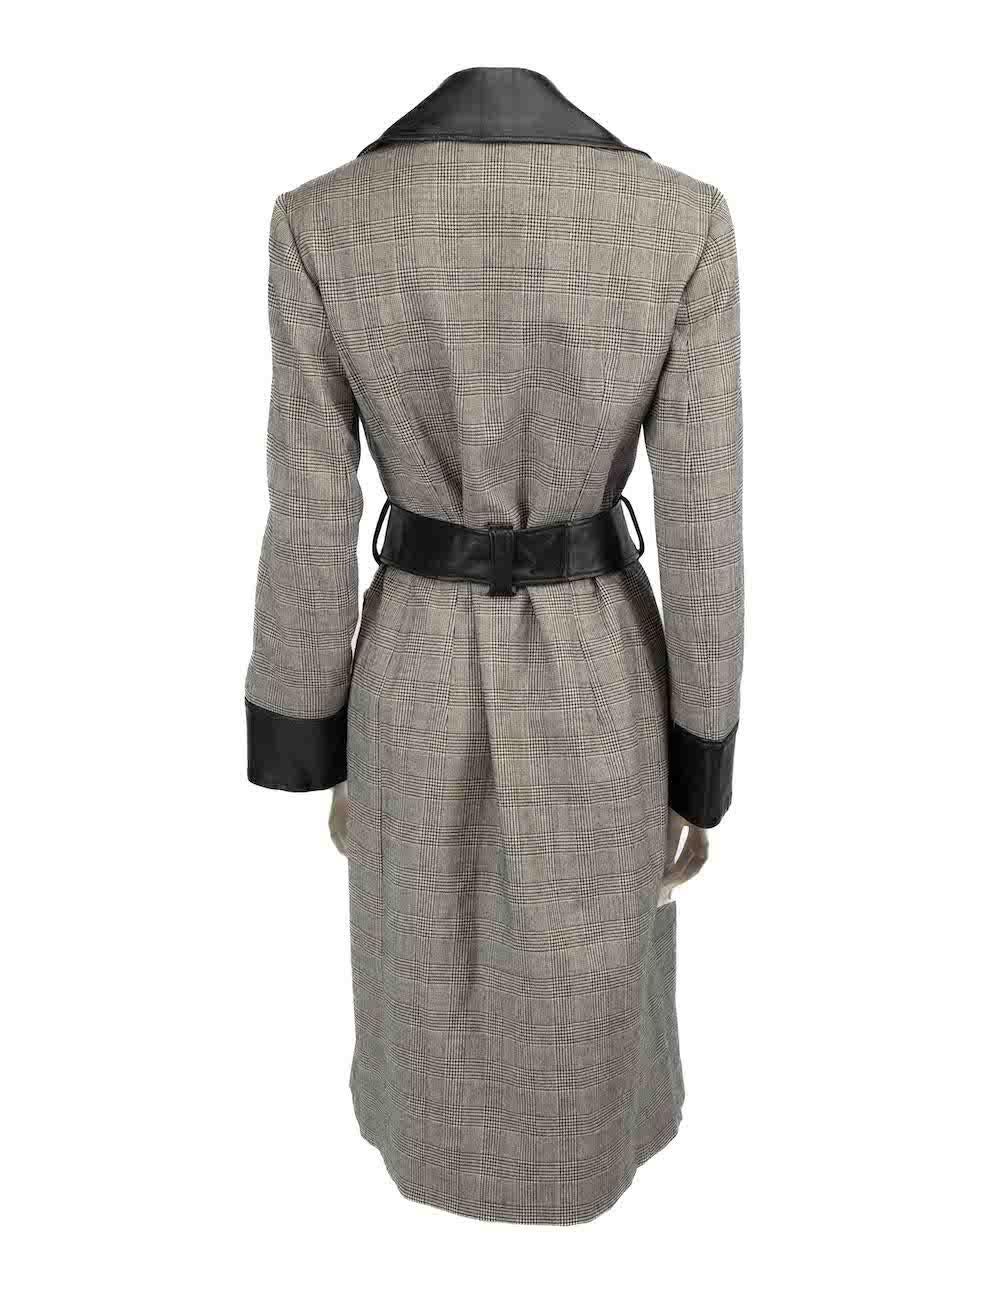 Dolce & Gabbana D&G Grey Wool Check Houndstooth Coat Size M In Excellent Condition For Sale In London, GB